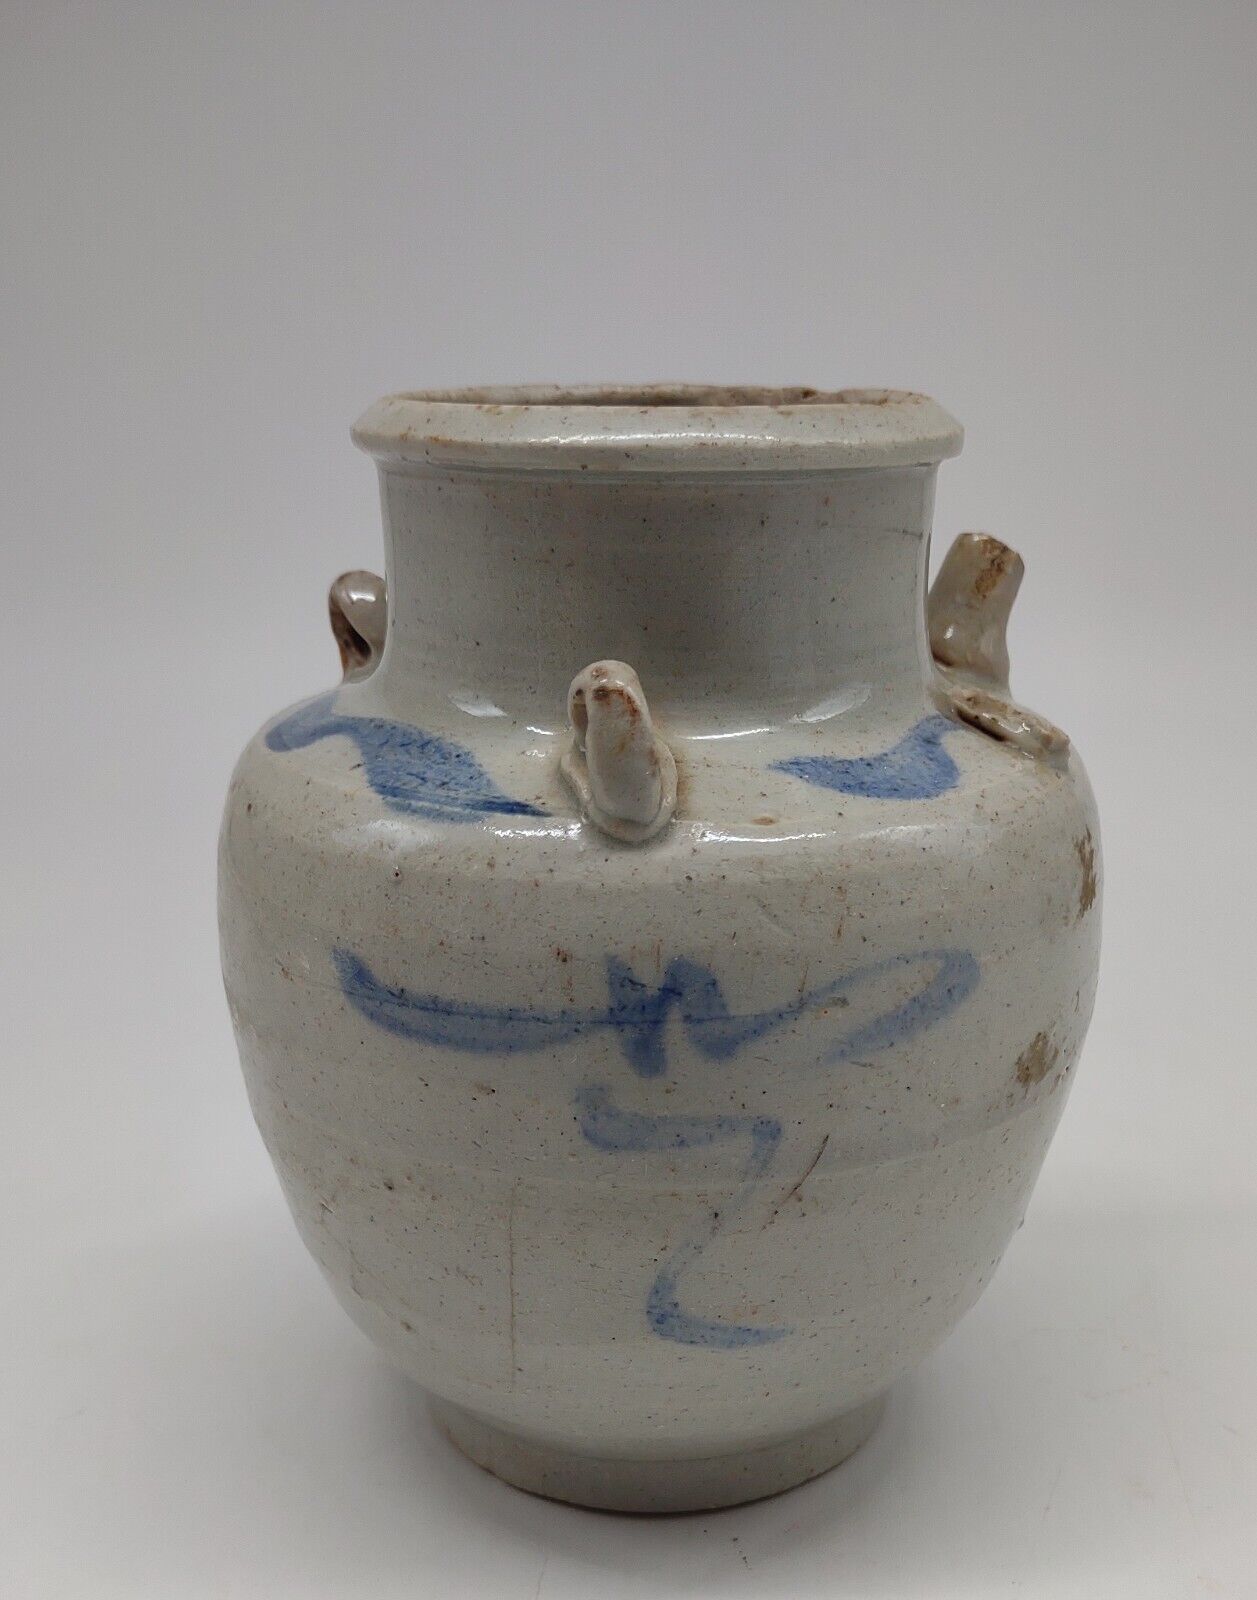  ANTIQUE CHINESE PORCELAIN VASE AND PITCHER 青花四系壶., 5\